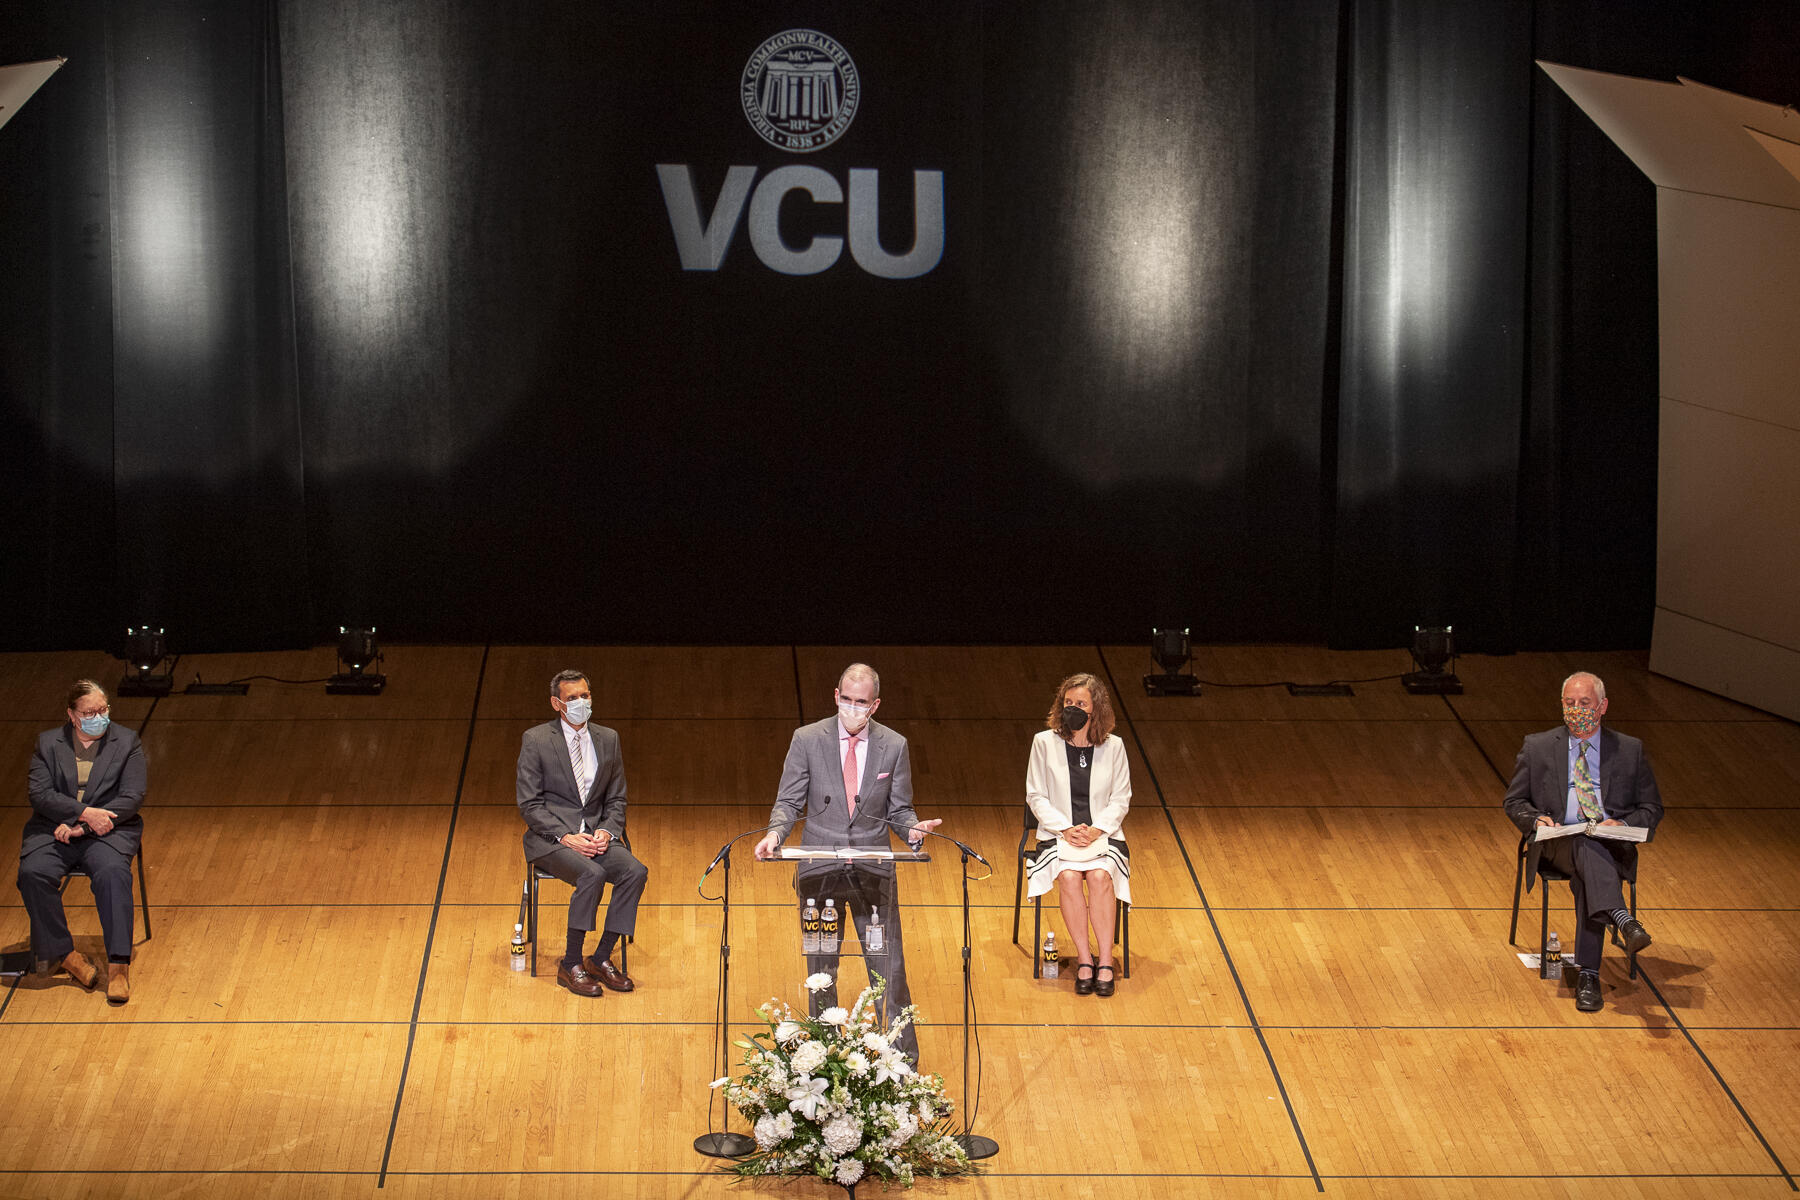 An overhead photo of Ray Shepherd speaking at the podium during VCU's annual Faculty Convocation event. 